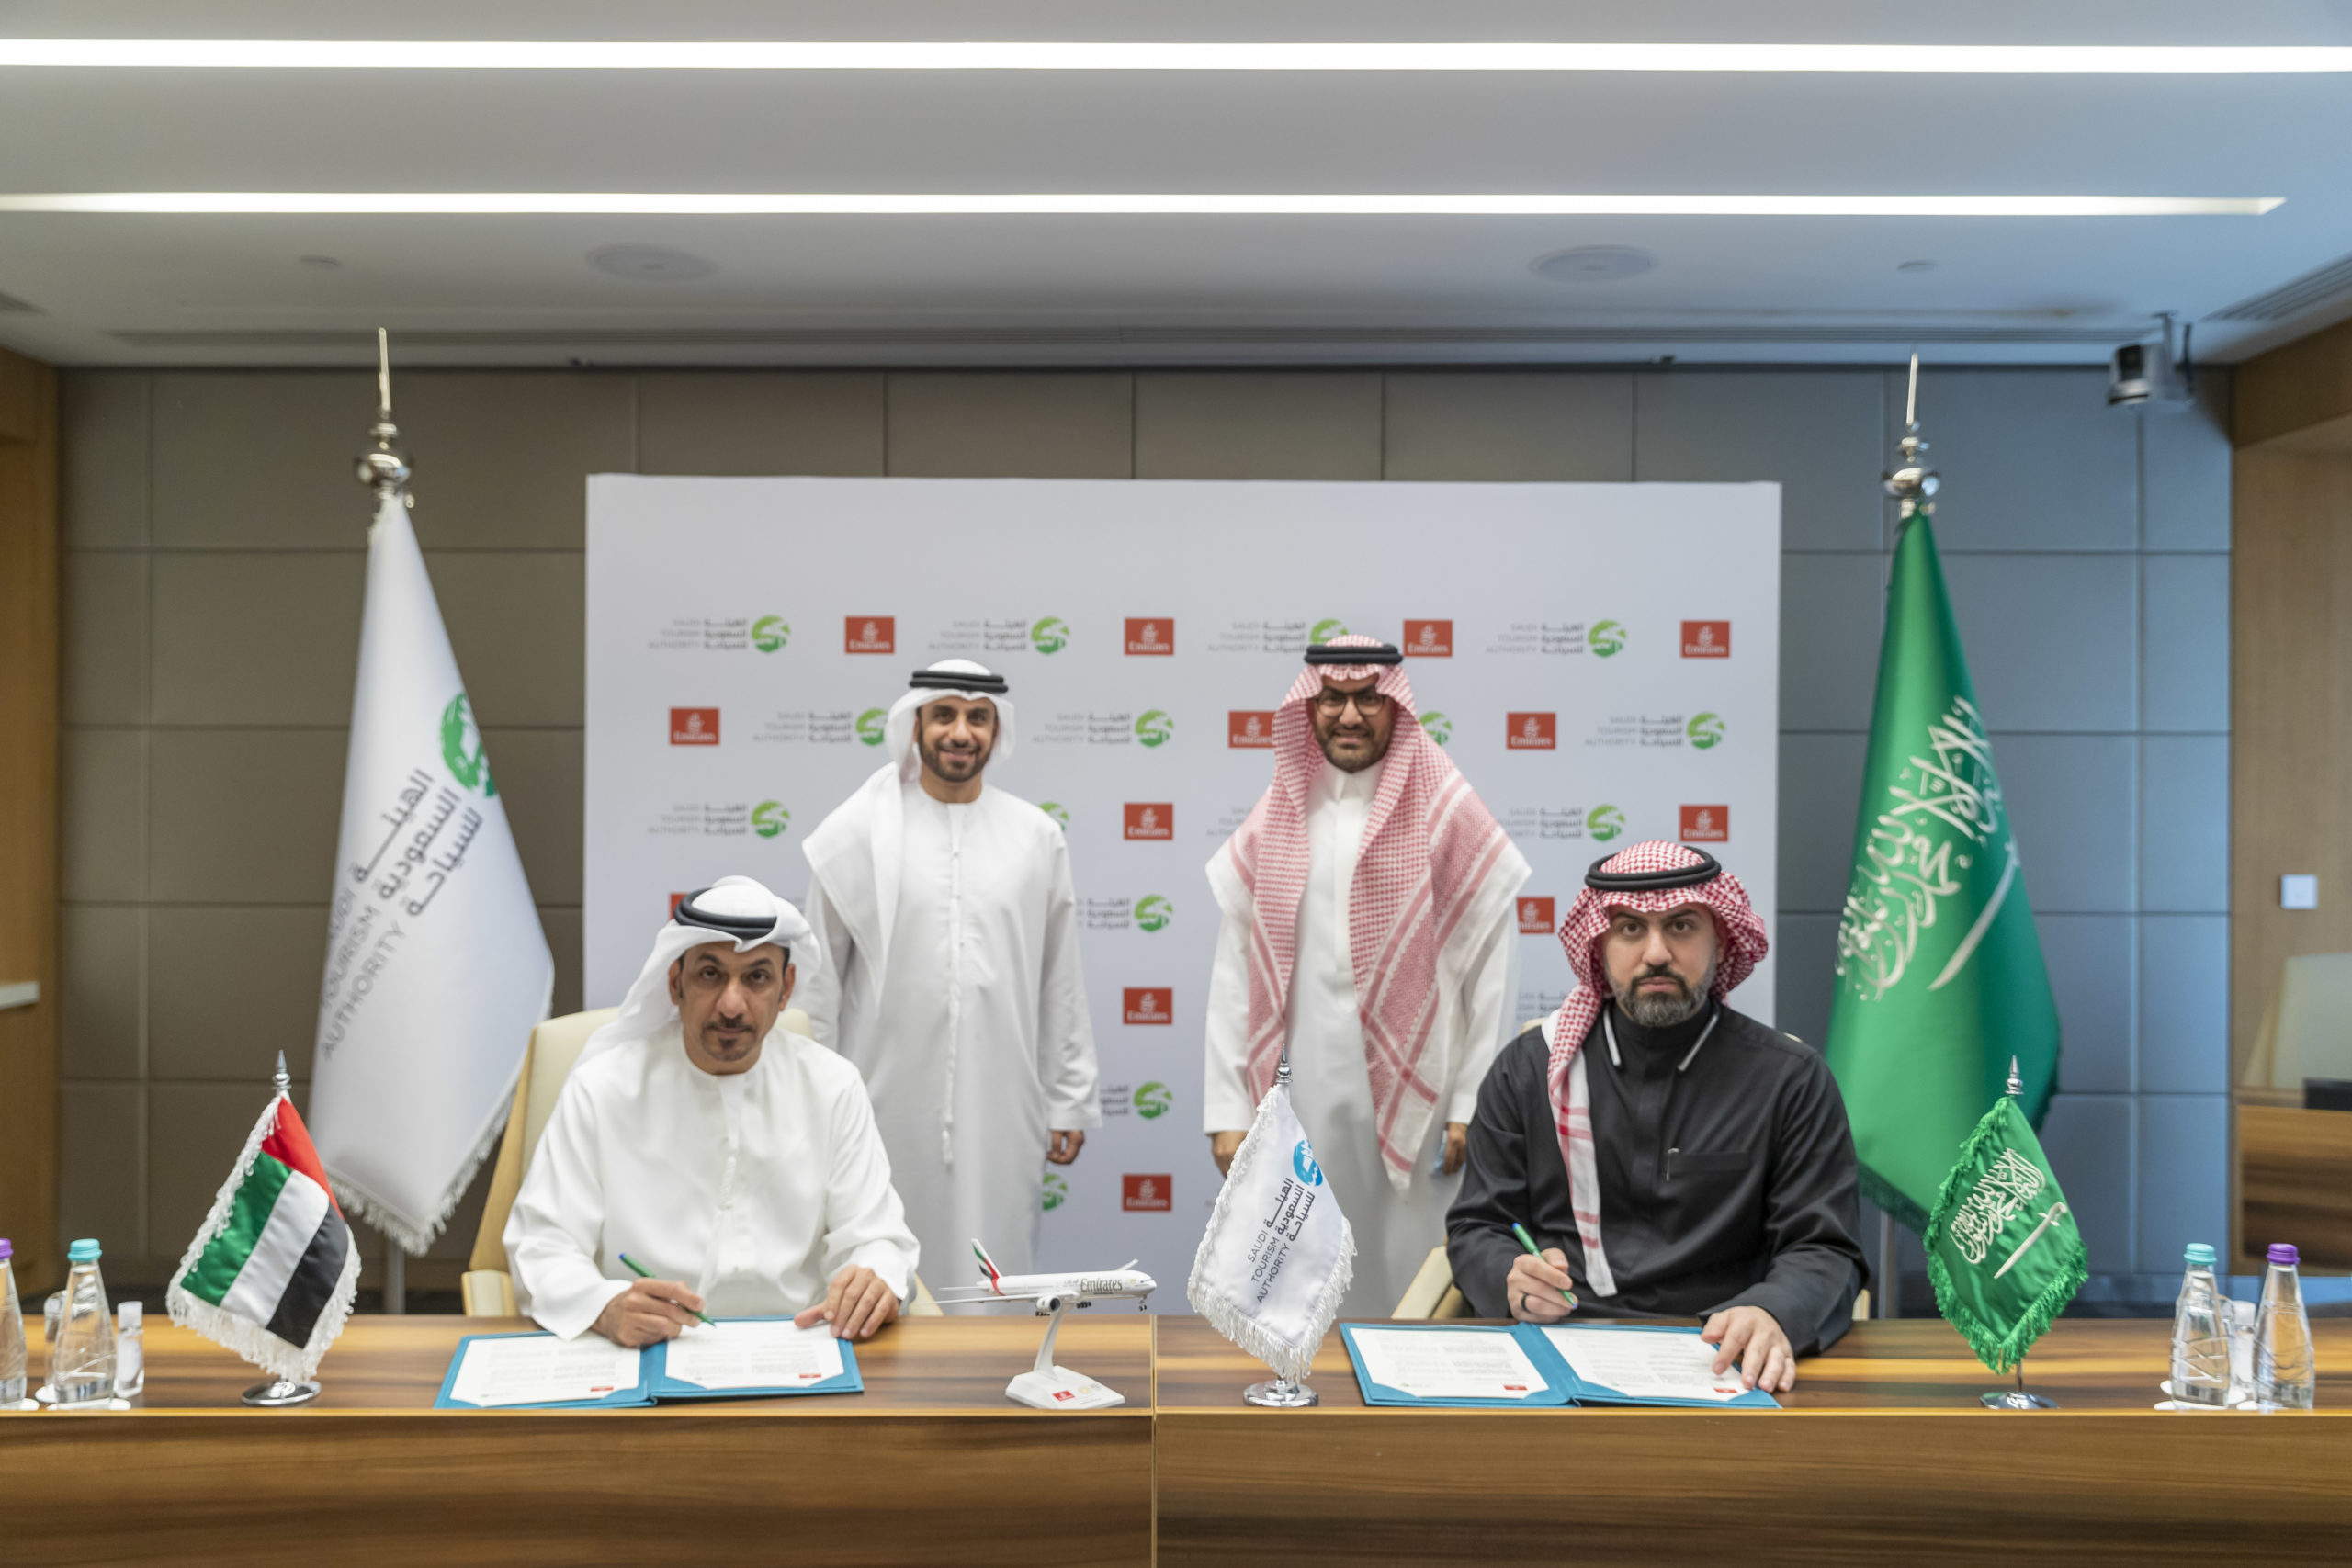 The MoU was signed in the presence of Mr. Fahd Hamidaddin, CEO and Board Member of the Saudi Tourism Authority and Adnan Kazim, Emirates’ Chief Commercial Officer. Adil Al Ghaith, Senior Vice President Commercial Operations, Gulf, Middle East and Central Asia, and Muhammad Bassrawi, VP of the Saudi Tourism Authority were the signatories of the MoU.